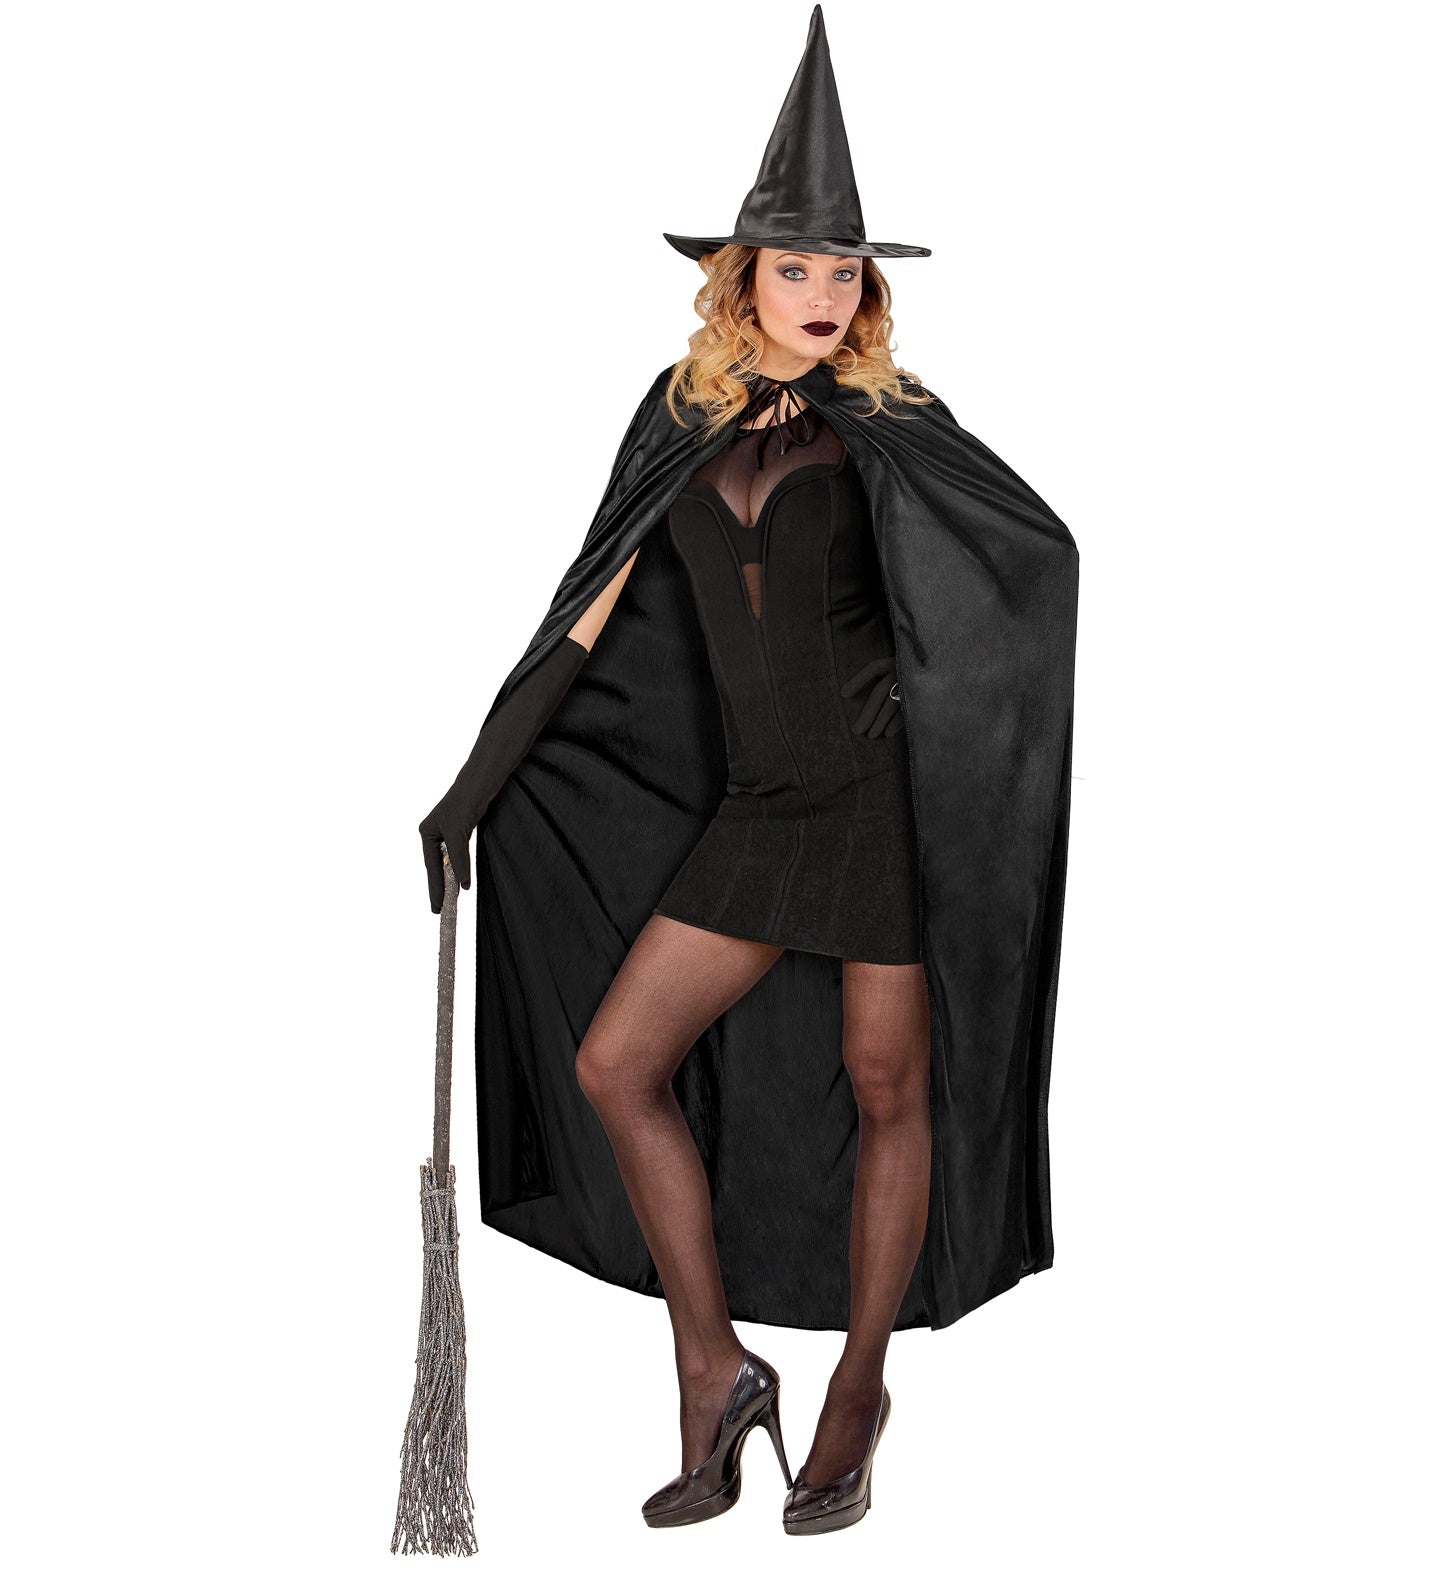 Black Cape 136cm for witch costume